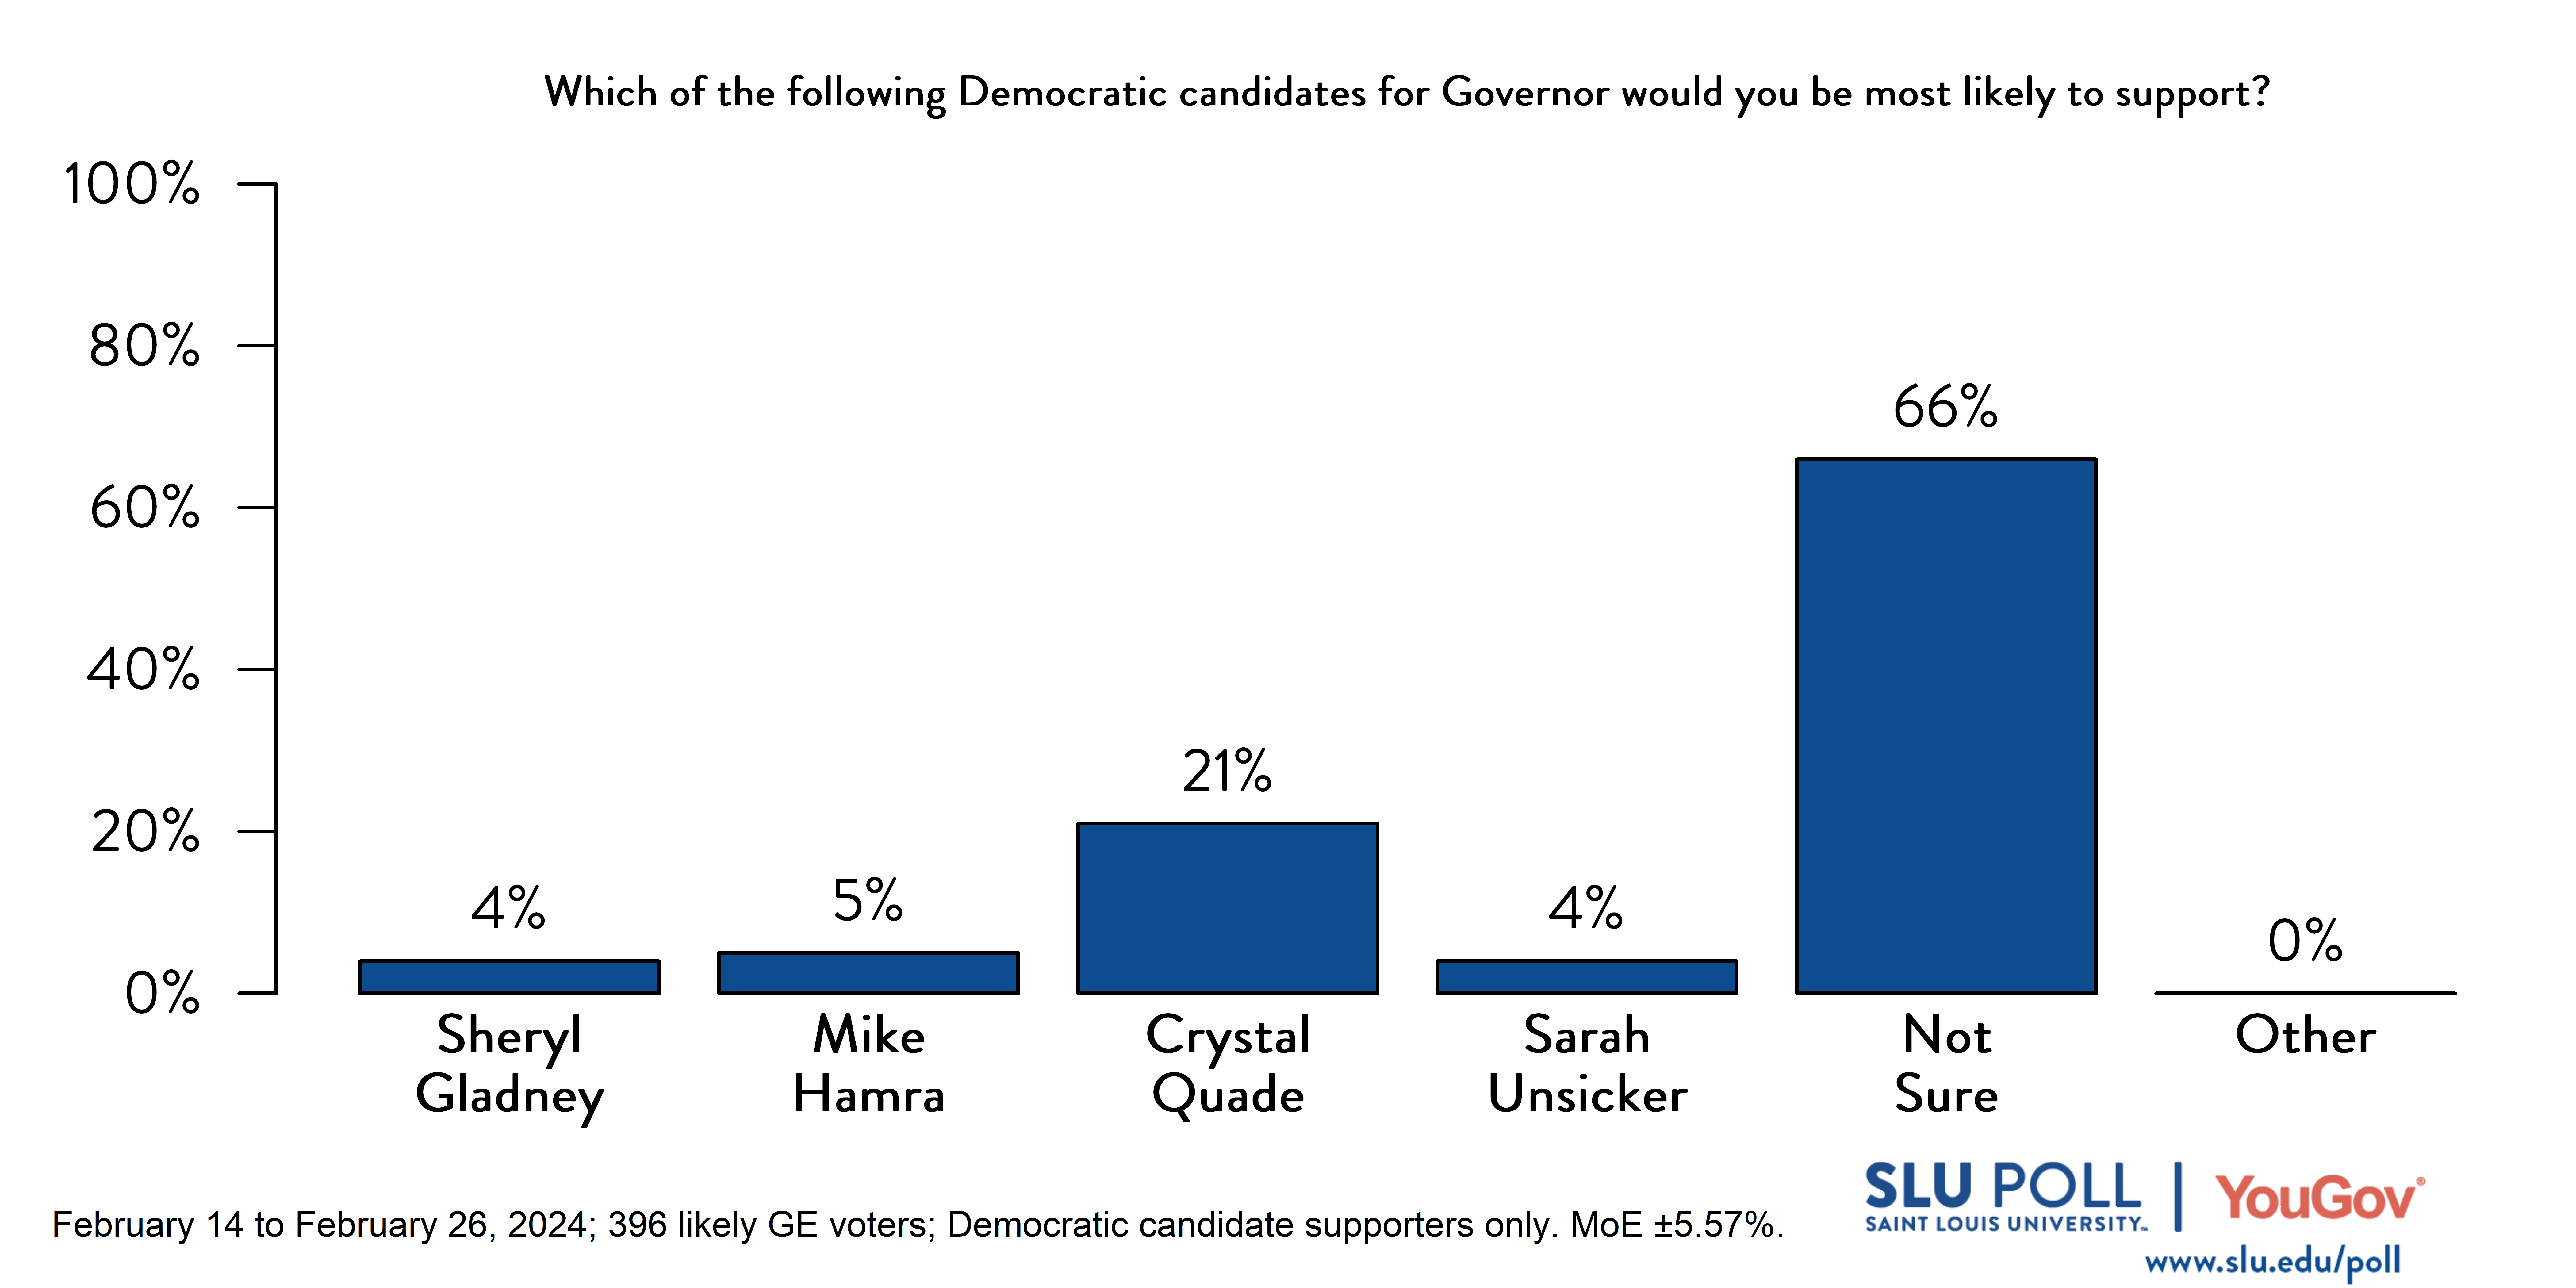 Bar graph showing poll results of Democratic Candidates for governor: Sheryl Gladney, 4%; Mike Hamra, 5%; Crystal Quade, 21%; Sarah Unsicker, 4%; Not sure, 66%; Other, 0%